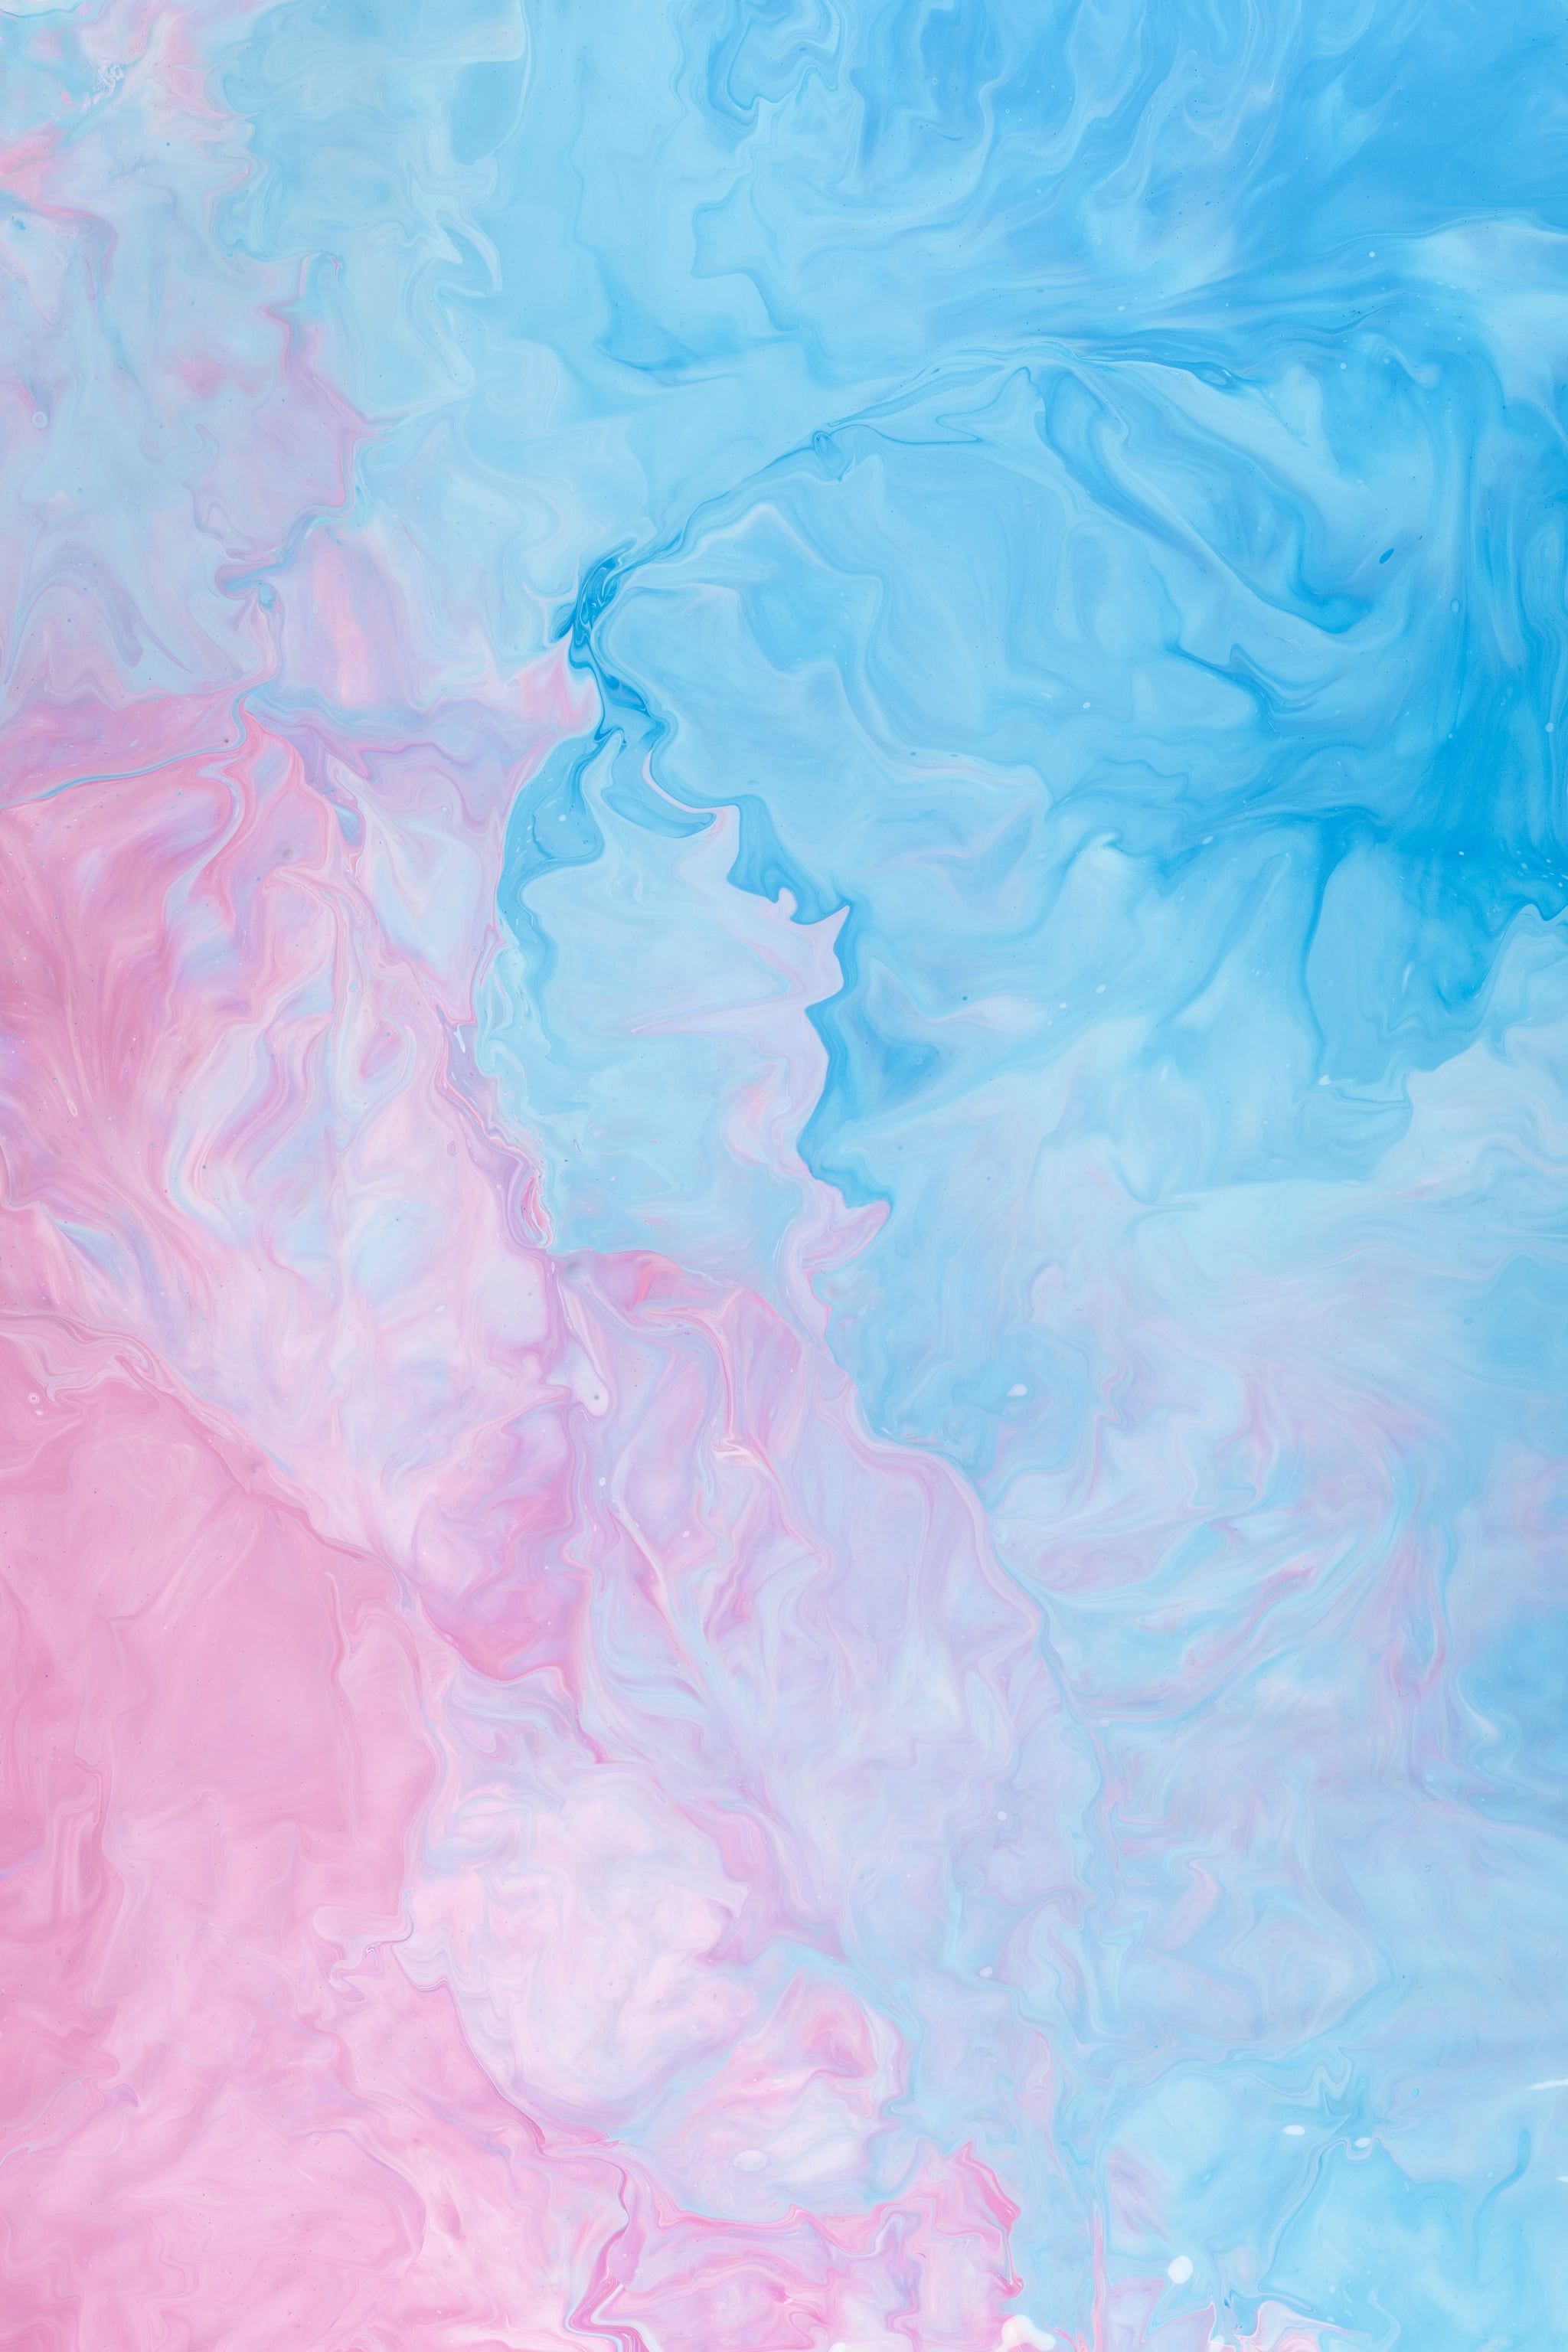 Pastel Pink and Blue iPhone Wallpaper. The Best iOS 14 Wallpaper Ideas That'll Make Your Phone Look Aesthetically Pleasing AF